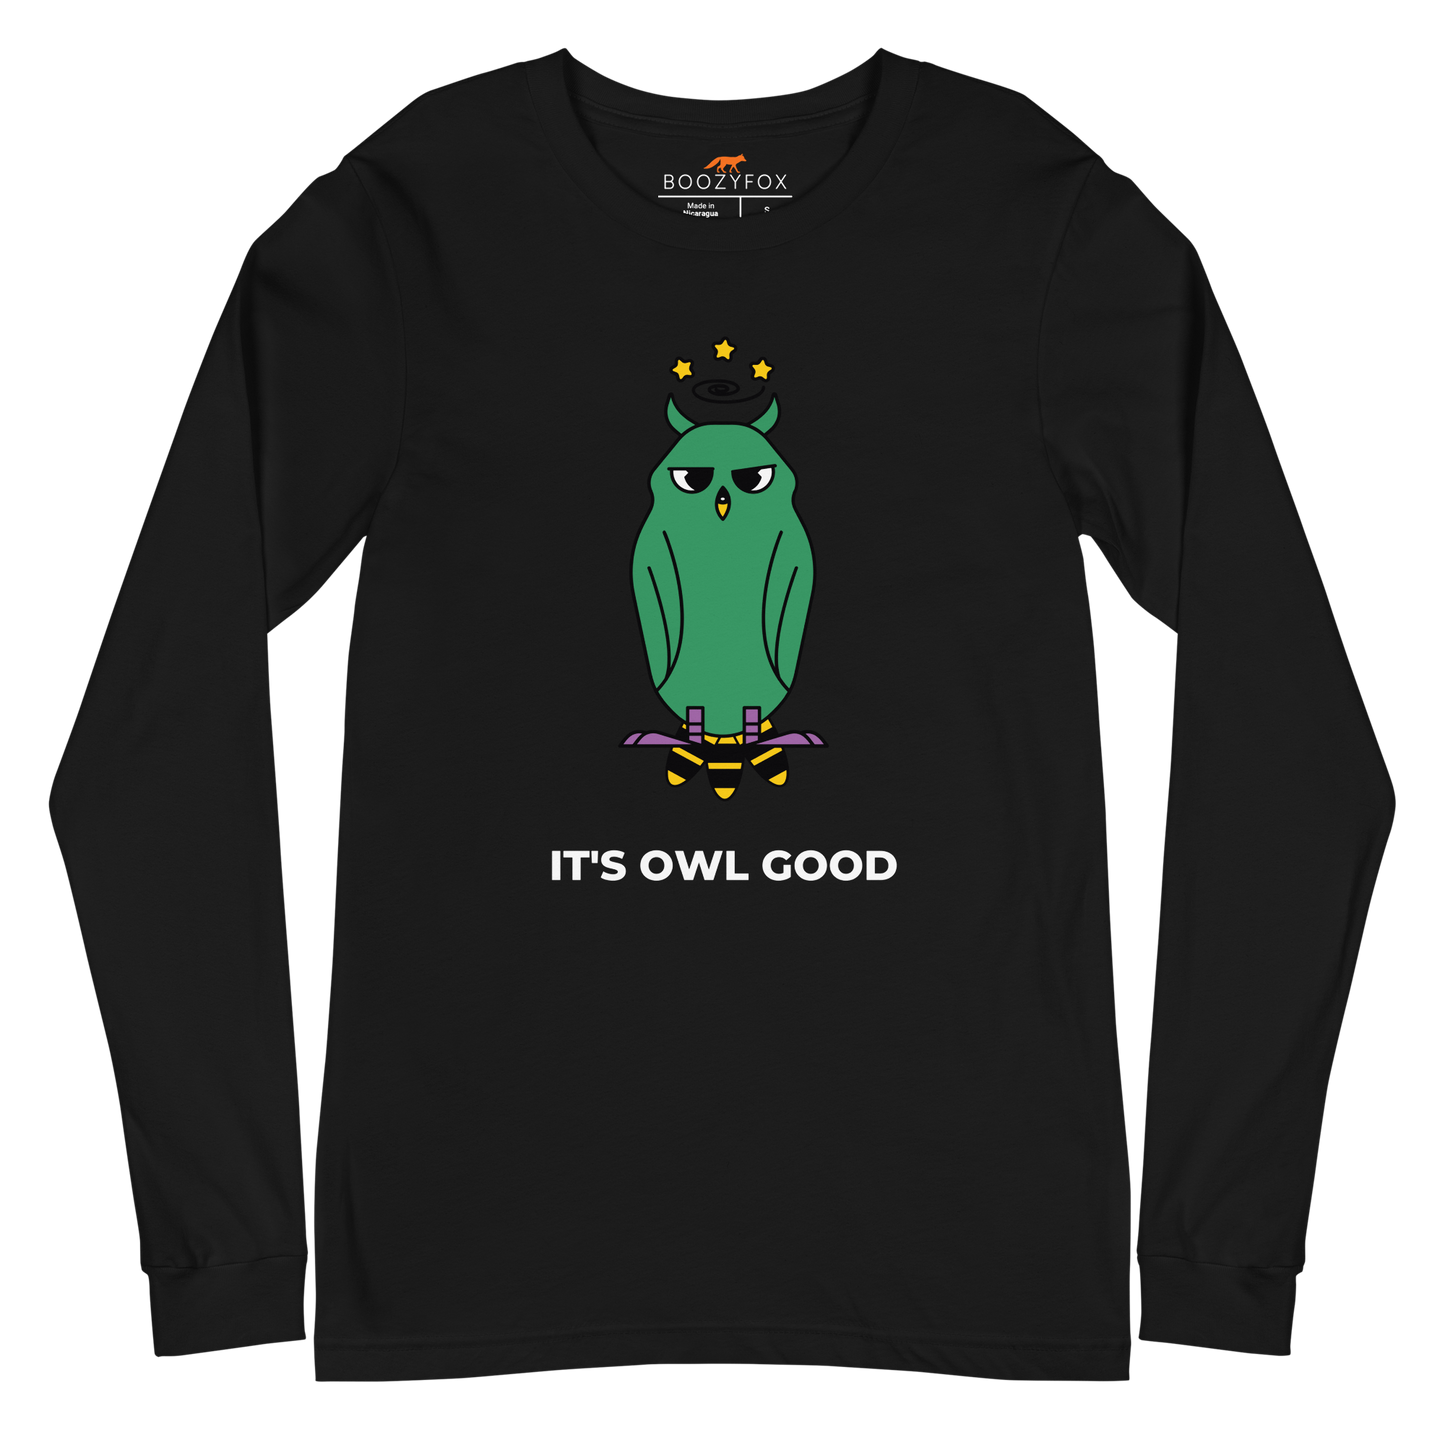 Black Owl Long Sleeve Tee featuring a captivating It's Owl Good graphic on the chest - Funny Owl Long Sleeve Graphic Tees - Boozy Fox